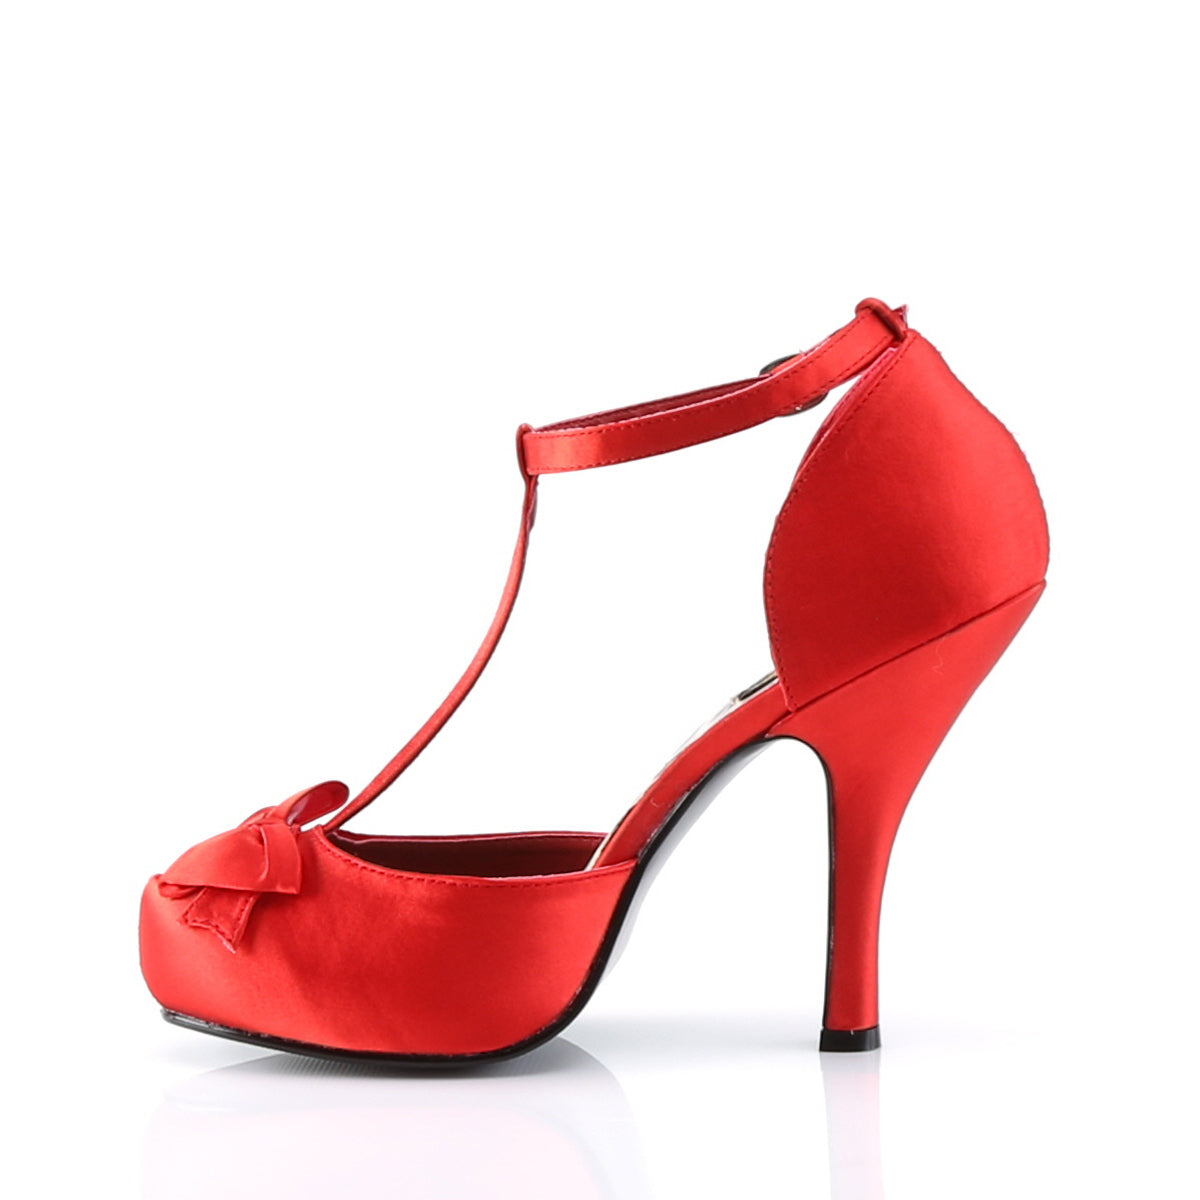 CUTIEPIE-12 Sexy 4.5" Heel Red Satin Retro Glamour Platforms-Pin Up Couture- Sexy Shoes Alternative Footwear